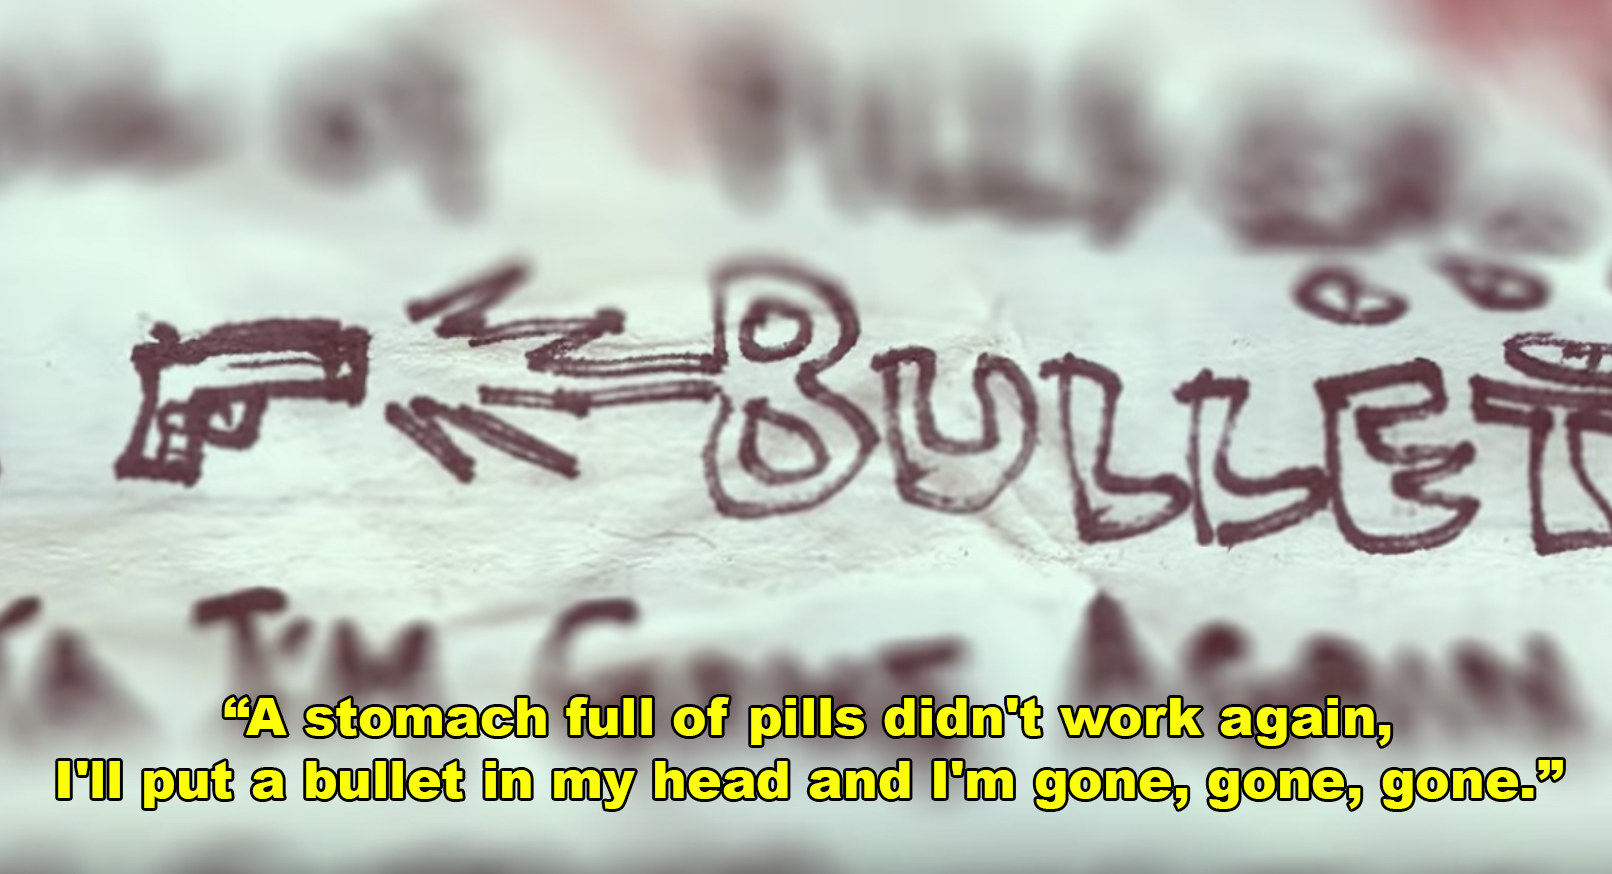 &quot;A stomach full of pills didn&#x27;t work again, I&#x27;ll put a bullet in my head and I&#x27;m gone, gone, gone.&quot;